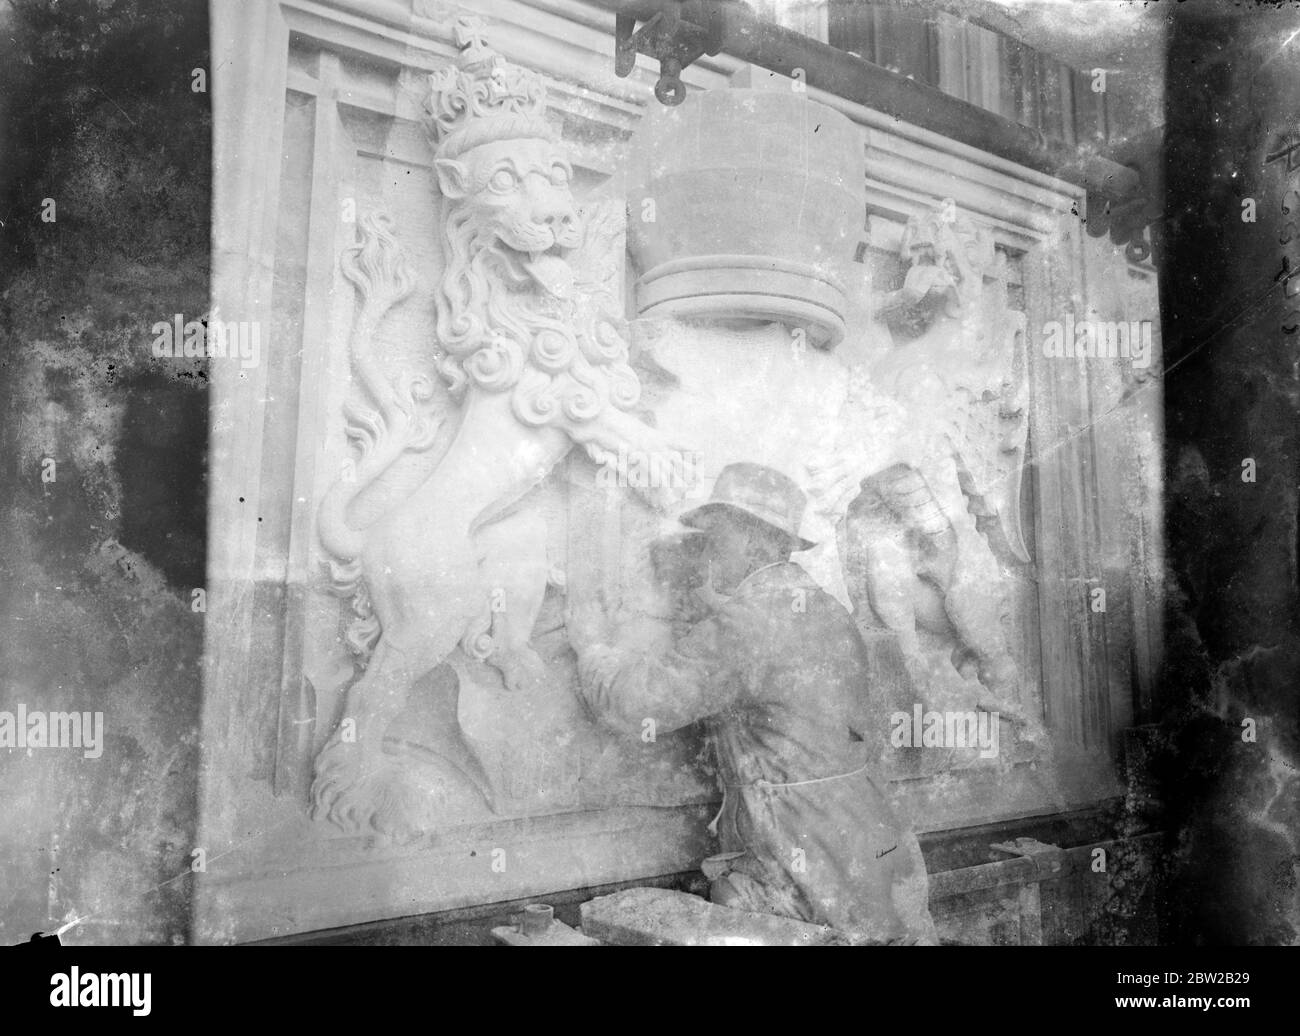 A sculptor working on a heraldic base relief [Royal Supporters of England / Royal Arms of England. [Lion and Dragon] 30s Stock Photo